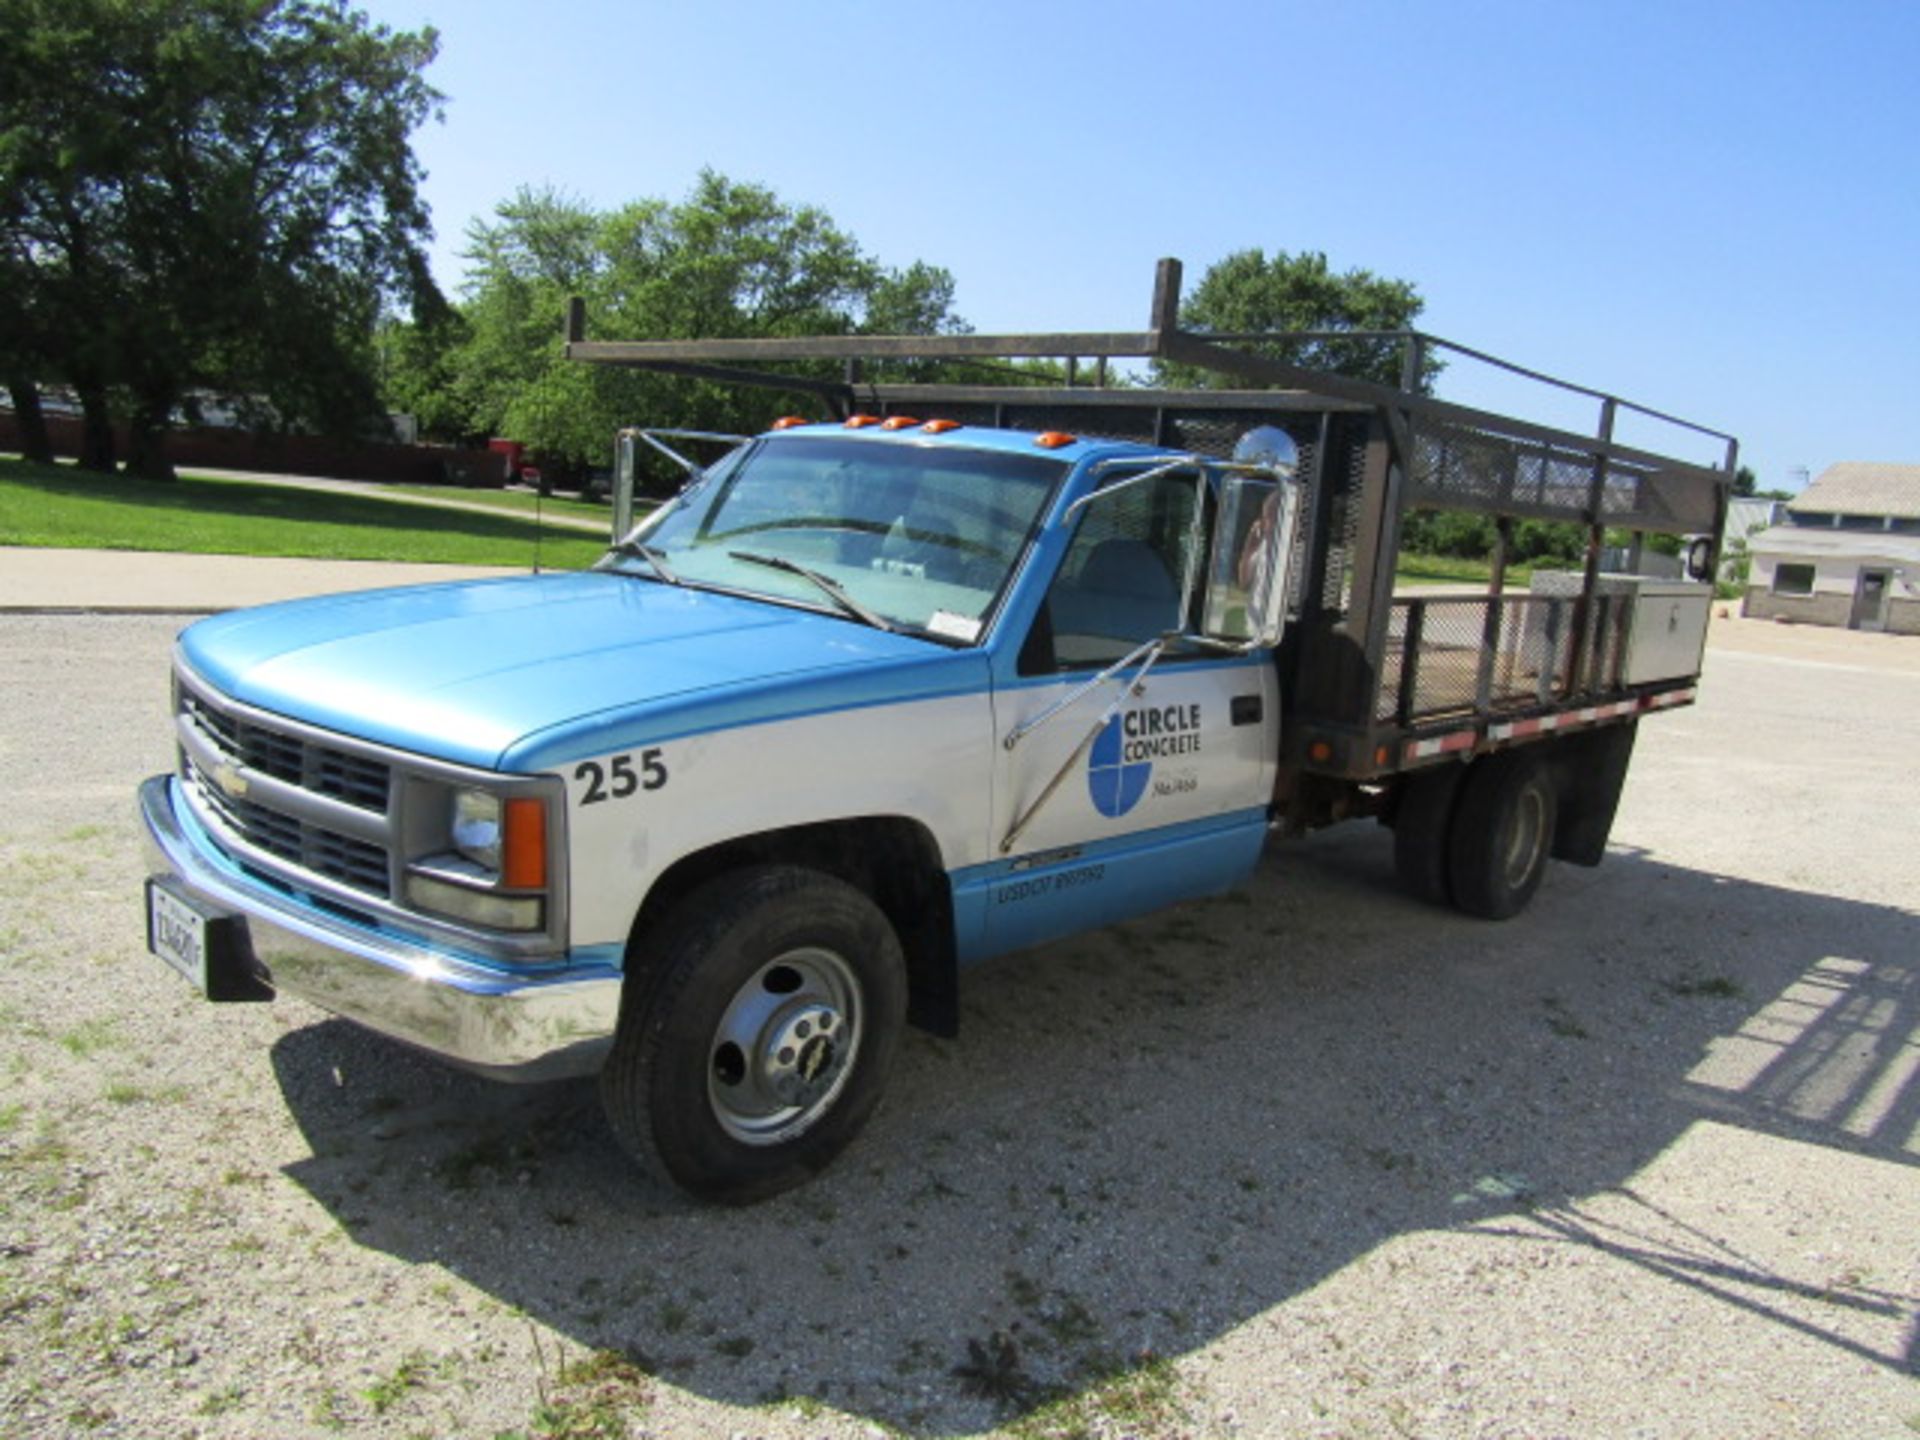 1999 Chevy 3500 Form Pick Up w/Tool Boxes, 9' Bed, Model GMT-400, Dually, VIN #1GBJC34J0XF063255, - Image 2 of 27